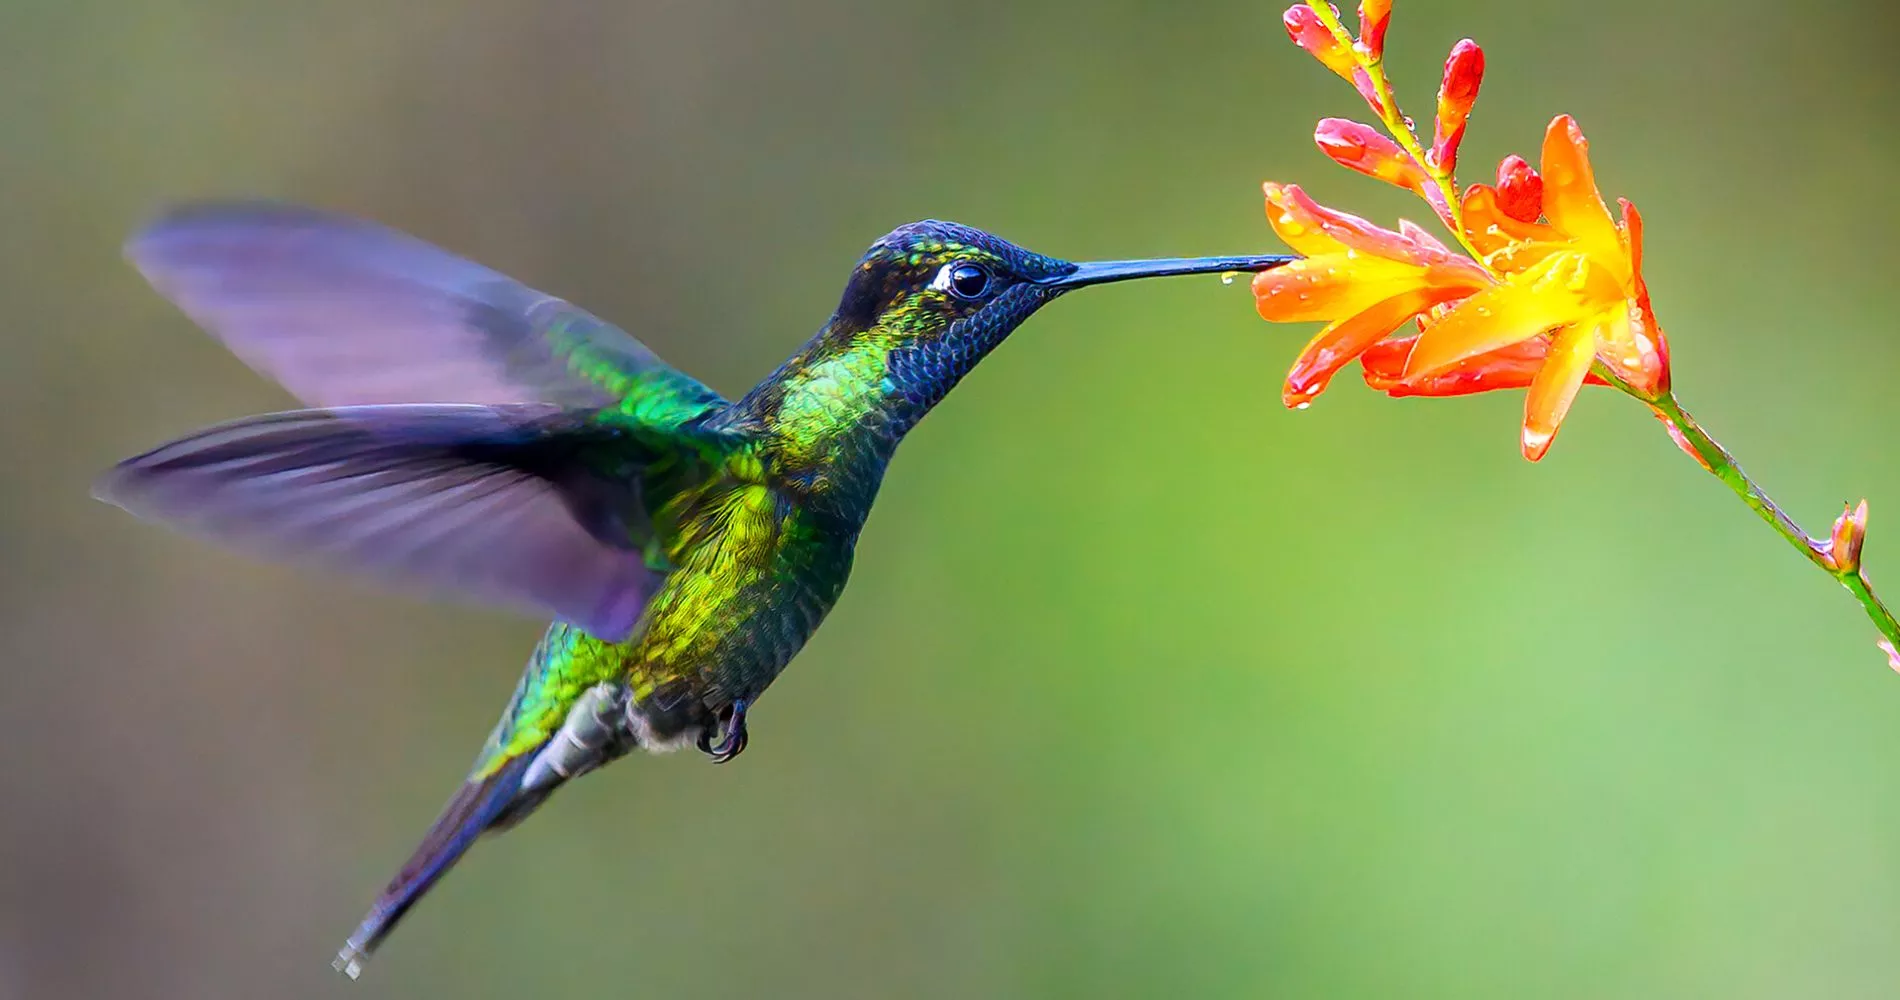 What is the Favorite Snack OF A HUMMINGBIRD?